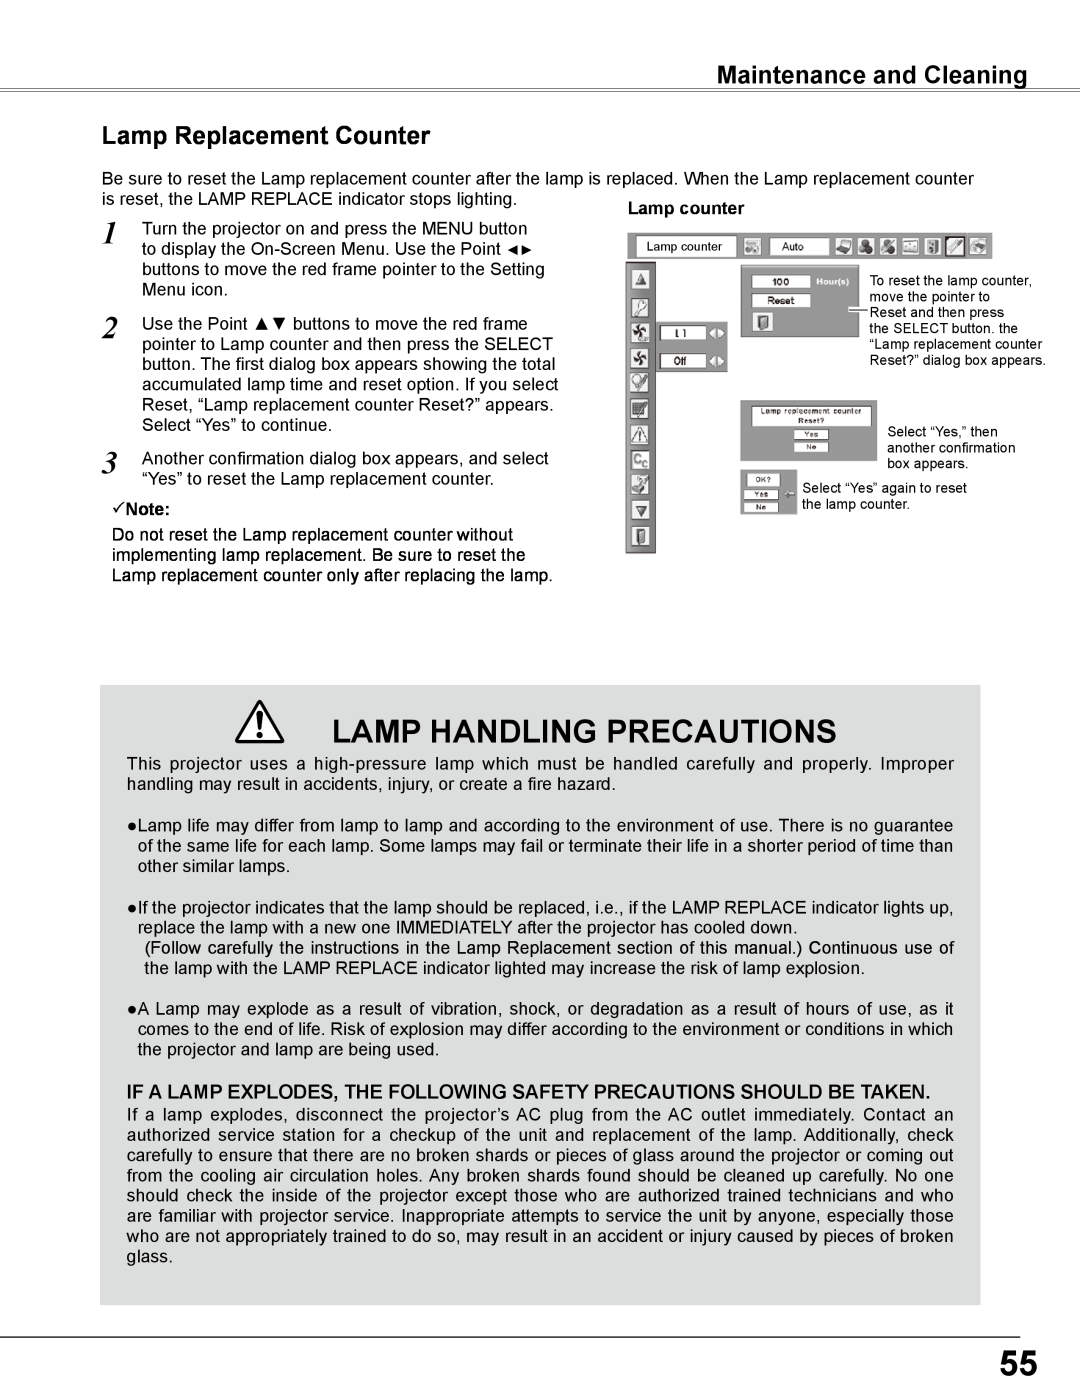 Sanyo PLC-WXL46 owner manual Lamp Handling Precautions, Maintenance and Cleaning Lamp Replacement Counter, Note 